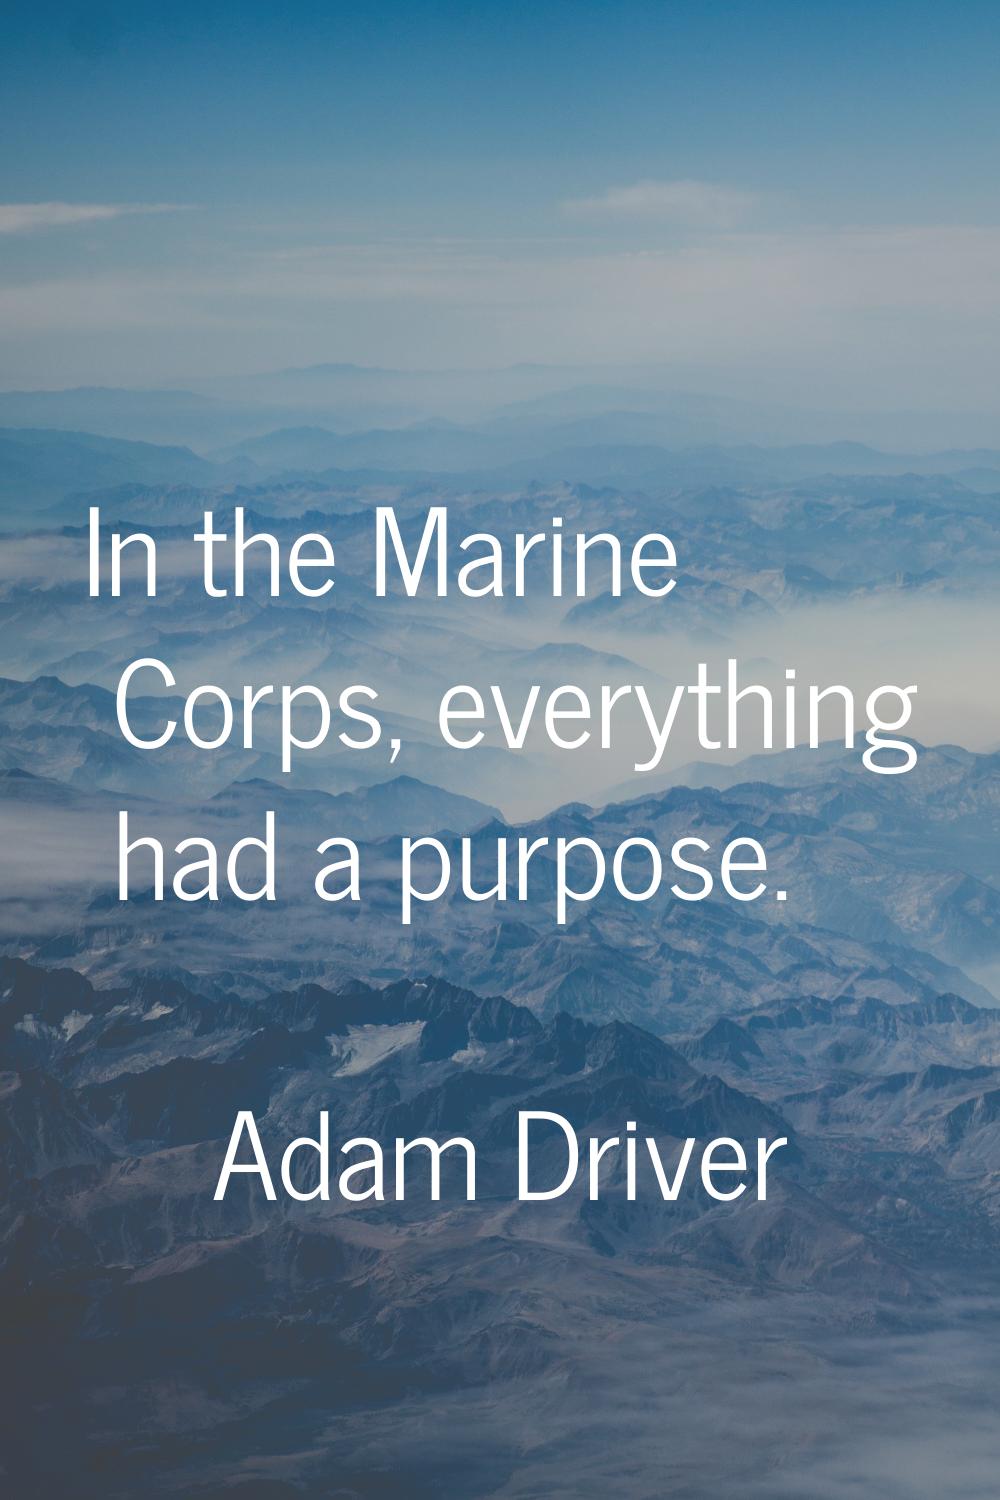 In the Marine Corps, everything had a purpose.